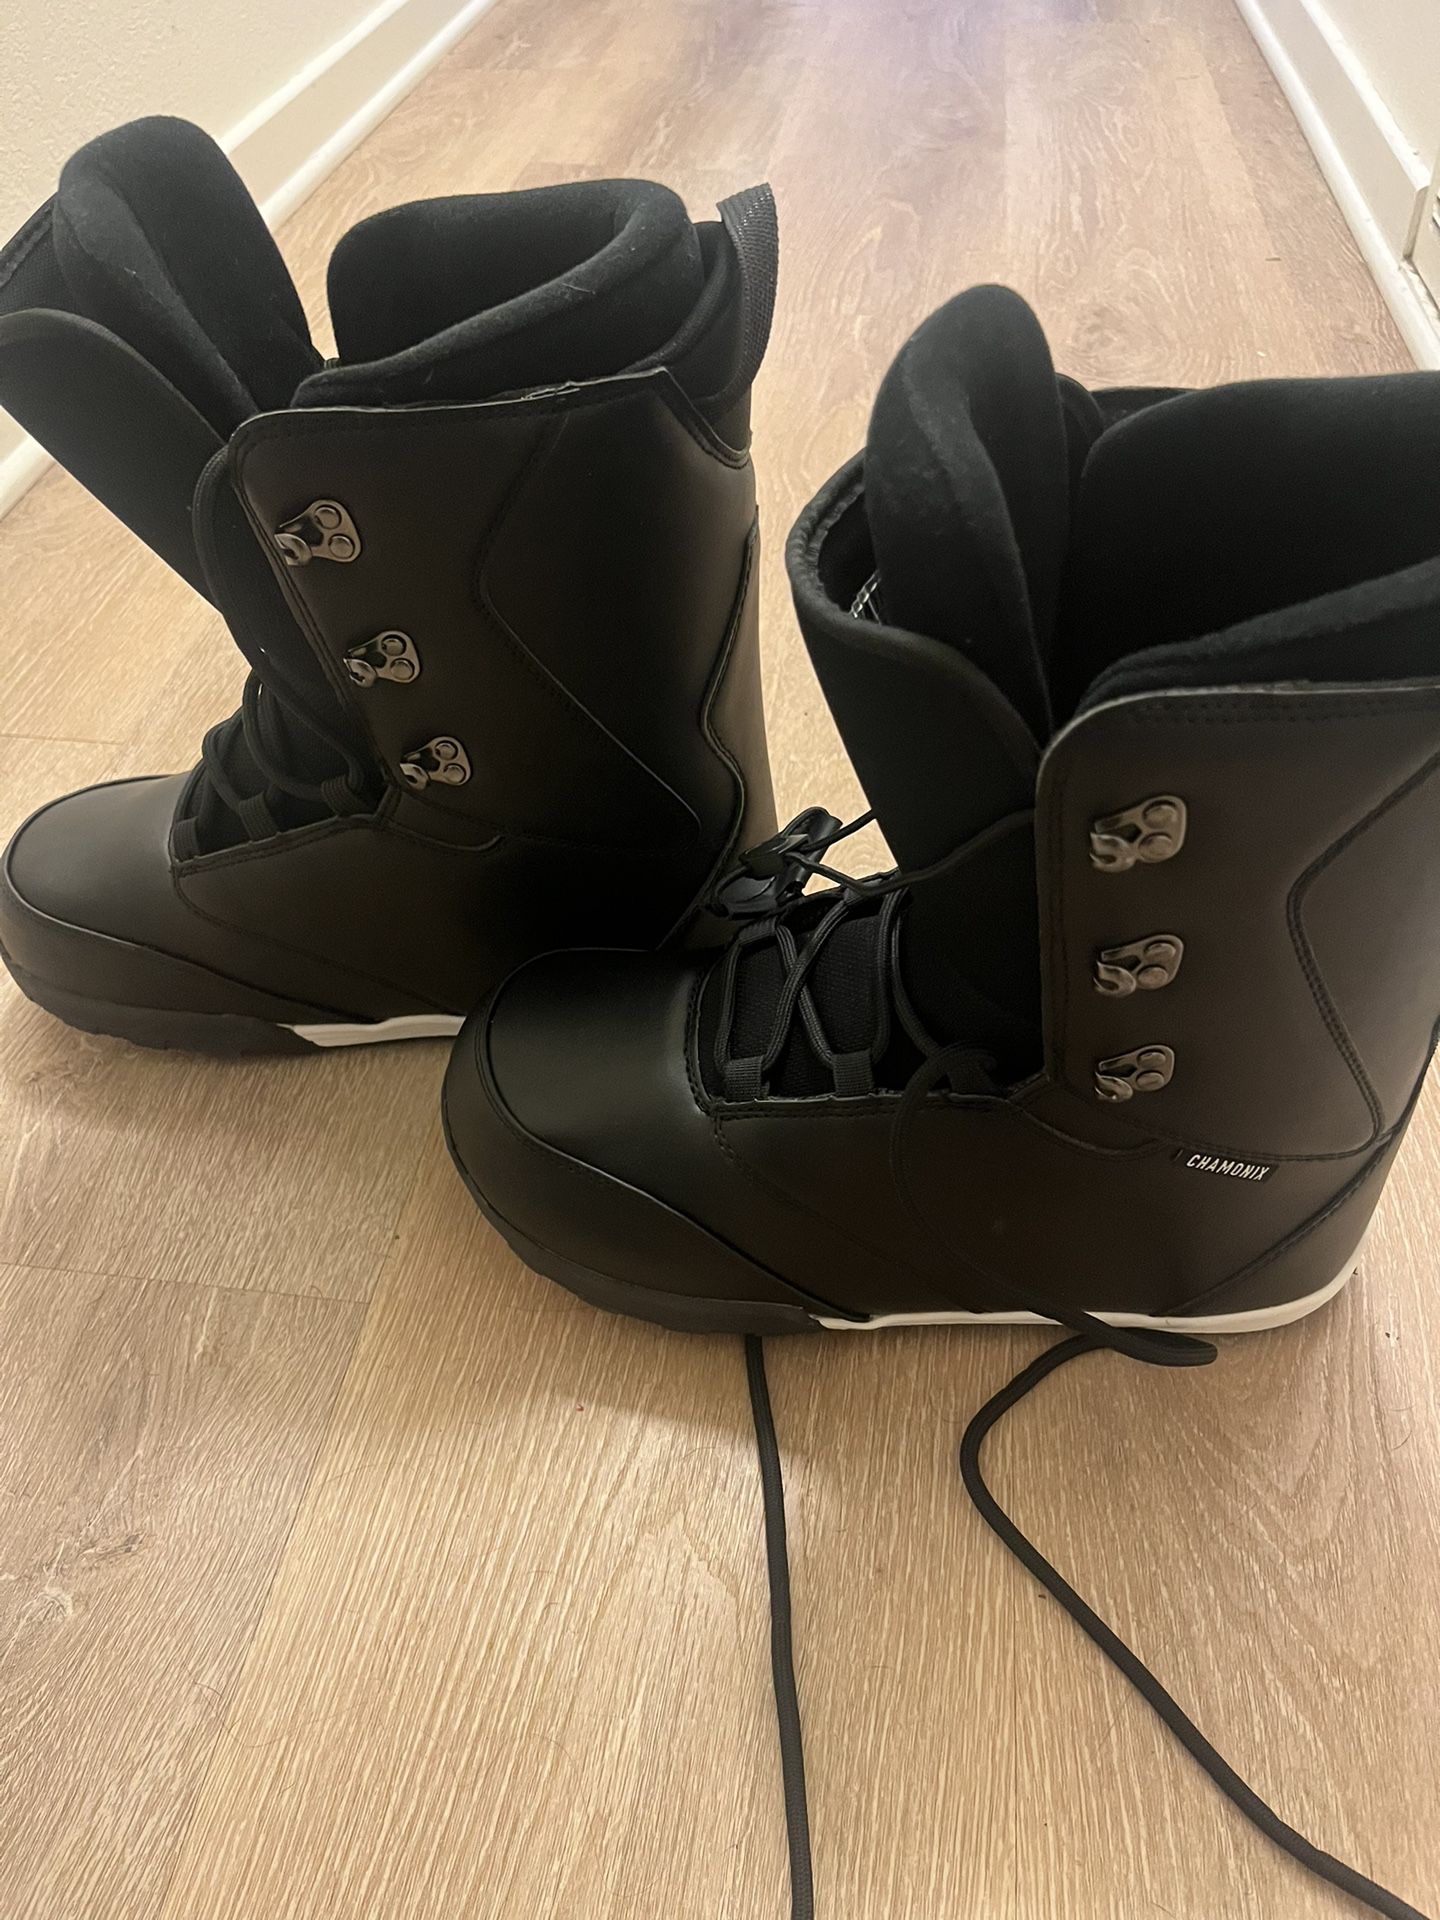 Boots Mens 10 Brand New for Sale in San Diego, CA - OfferUp